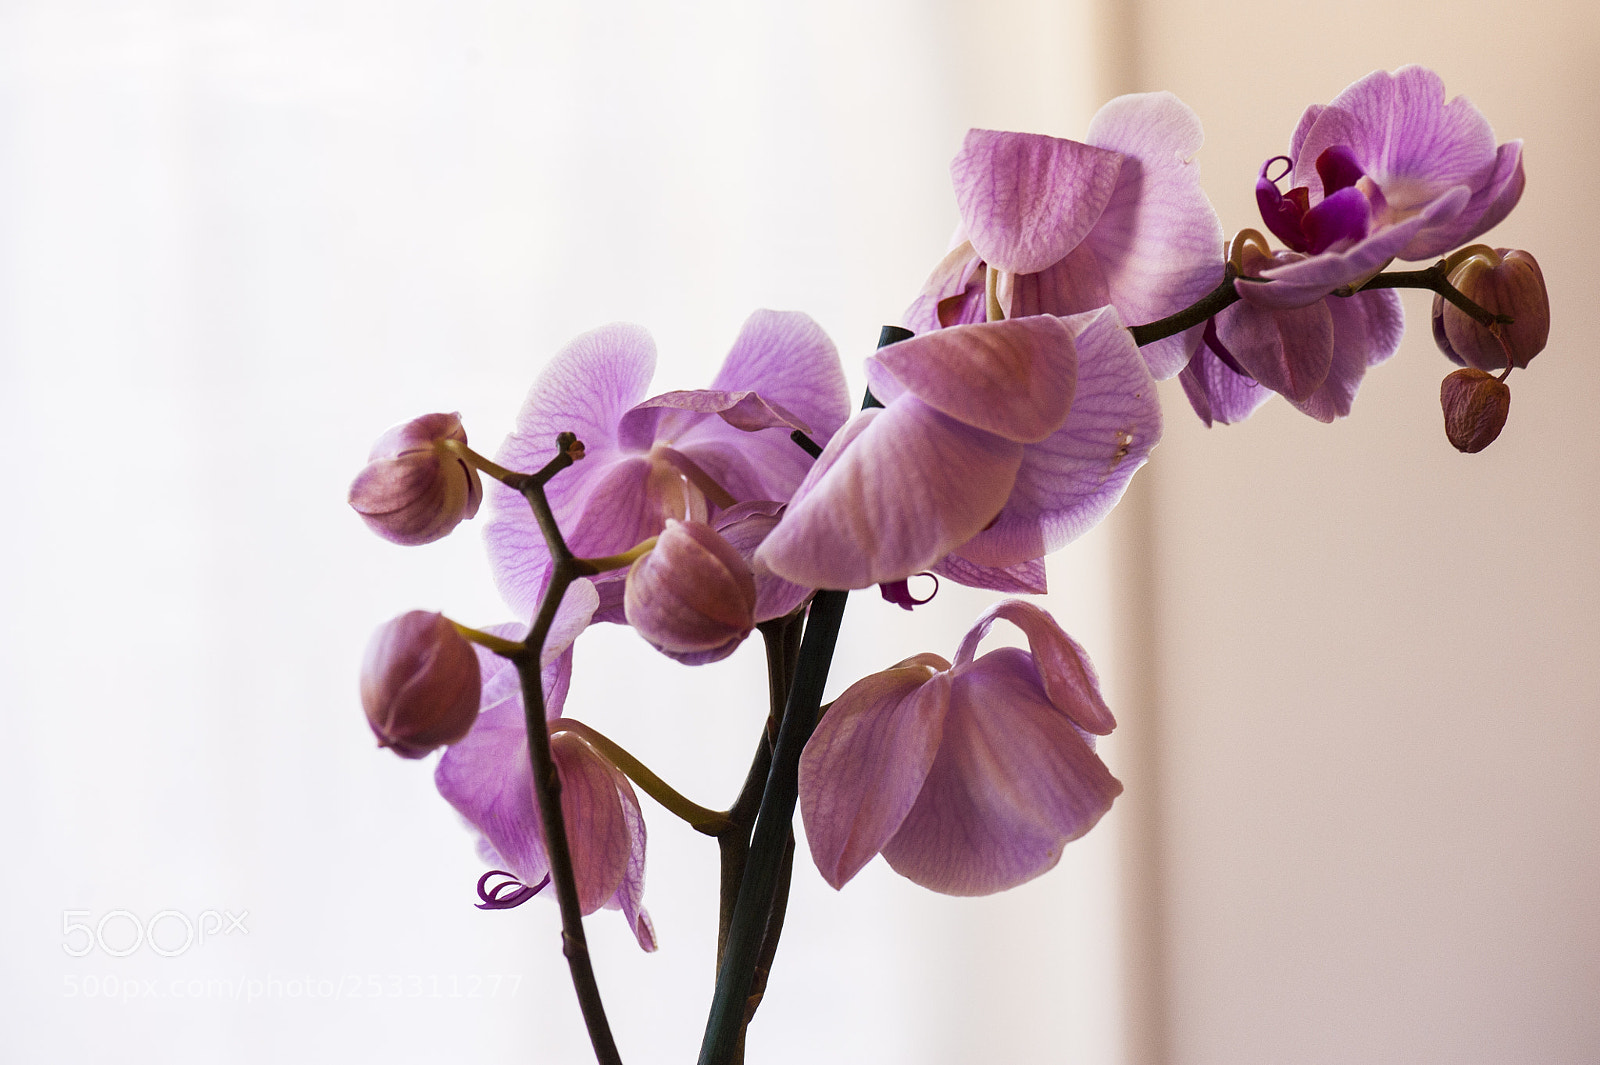 Nikon D700 sample photo. My pink orchid loves photography